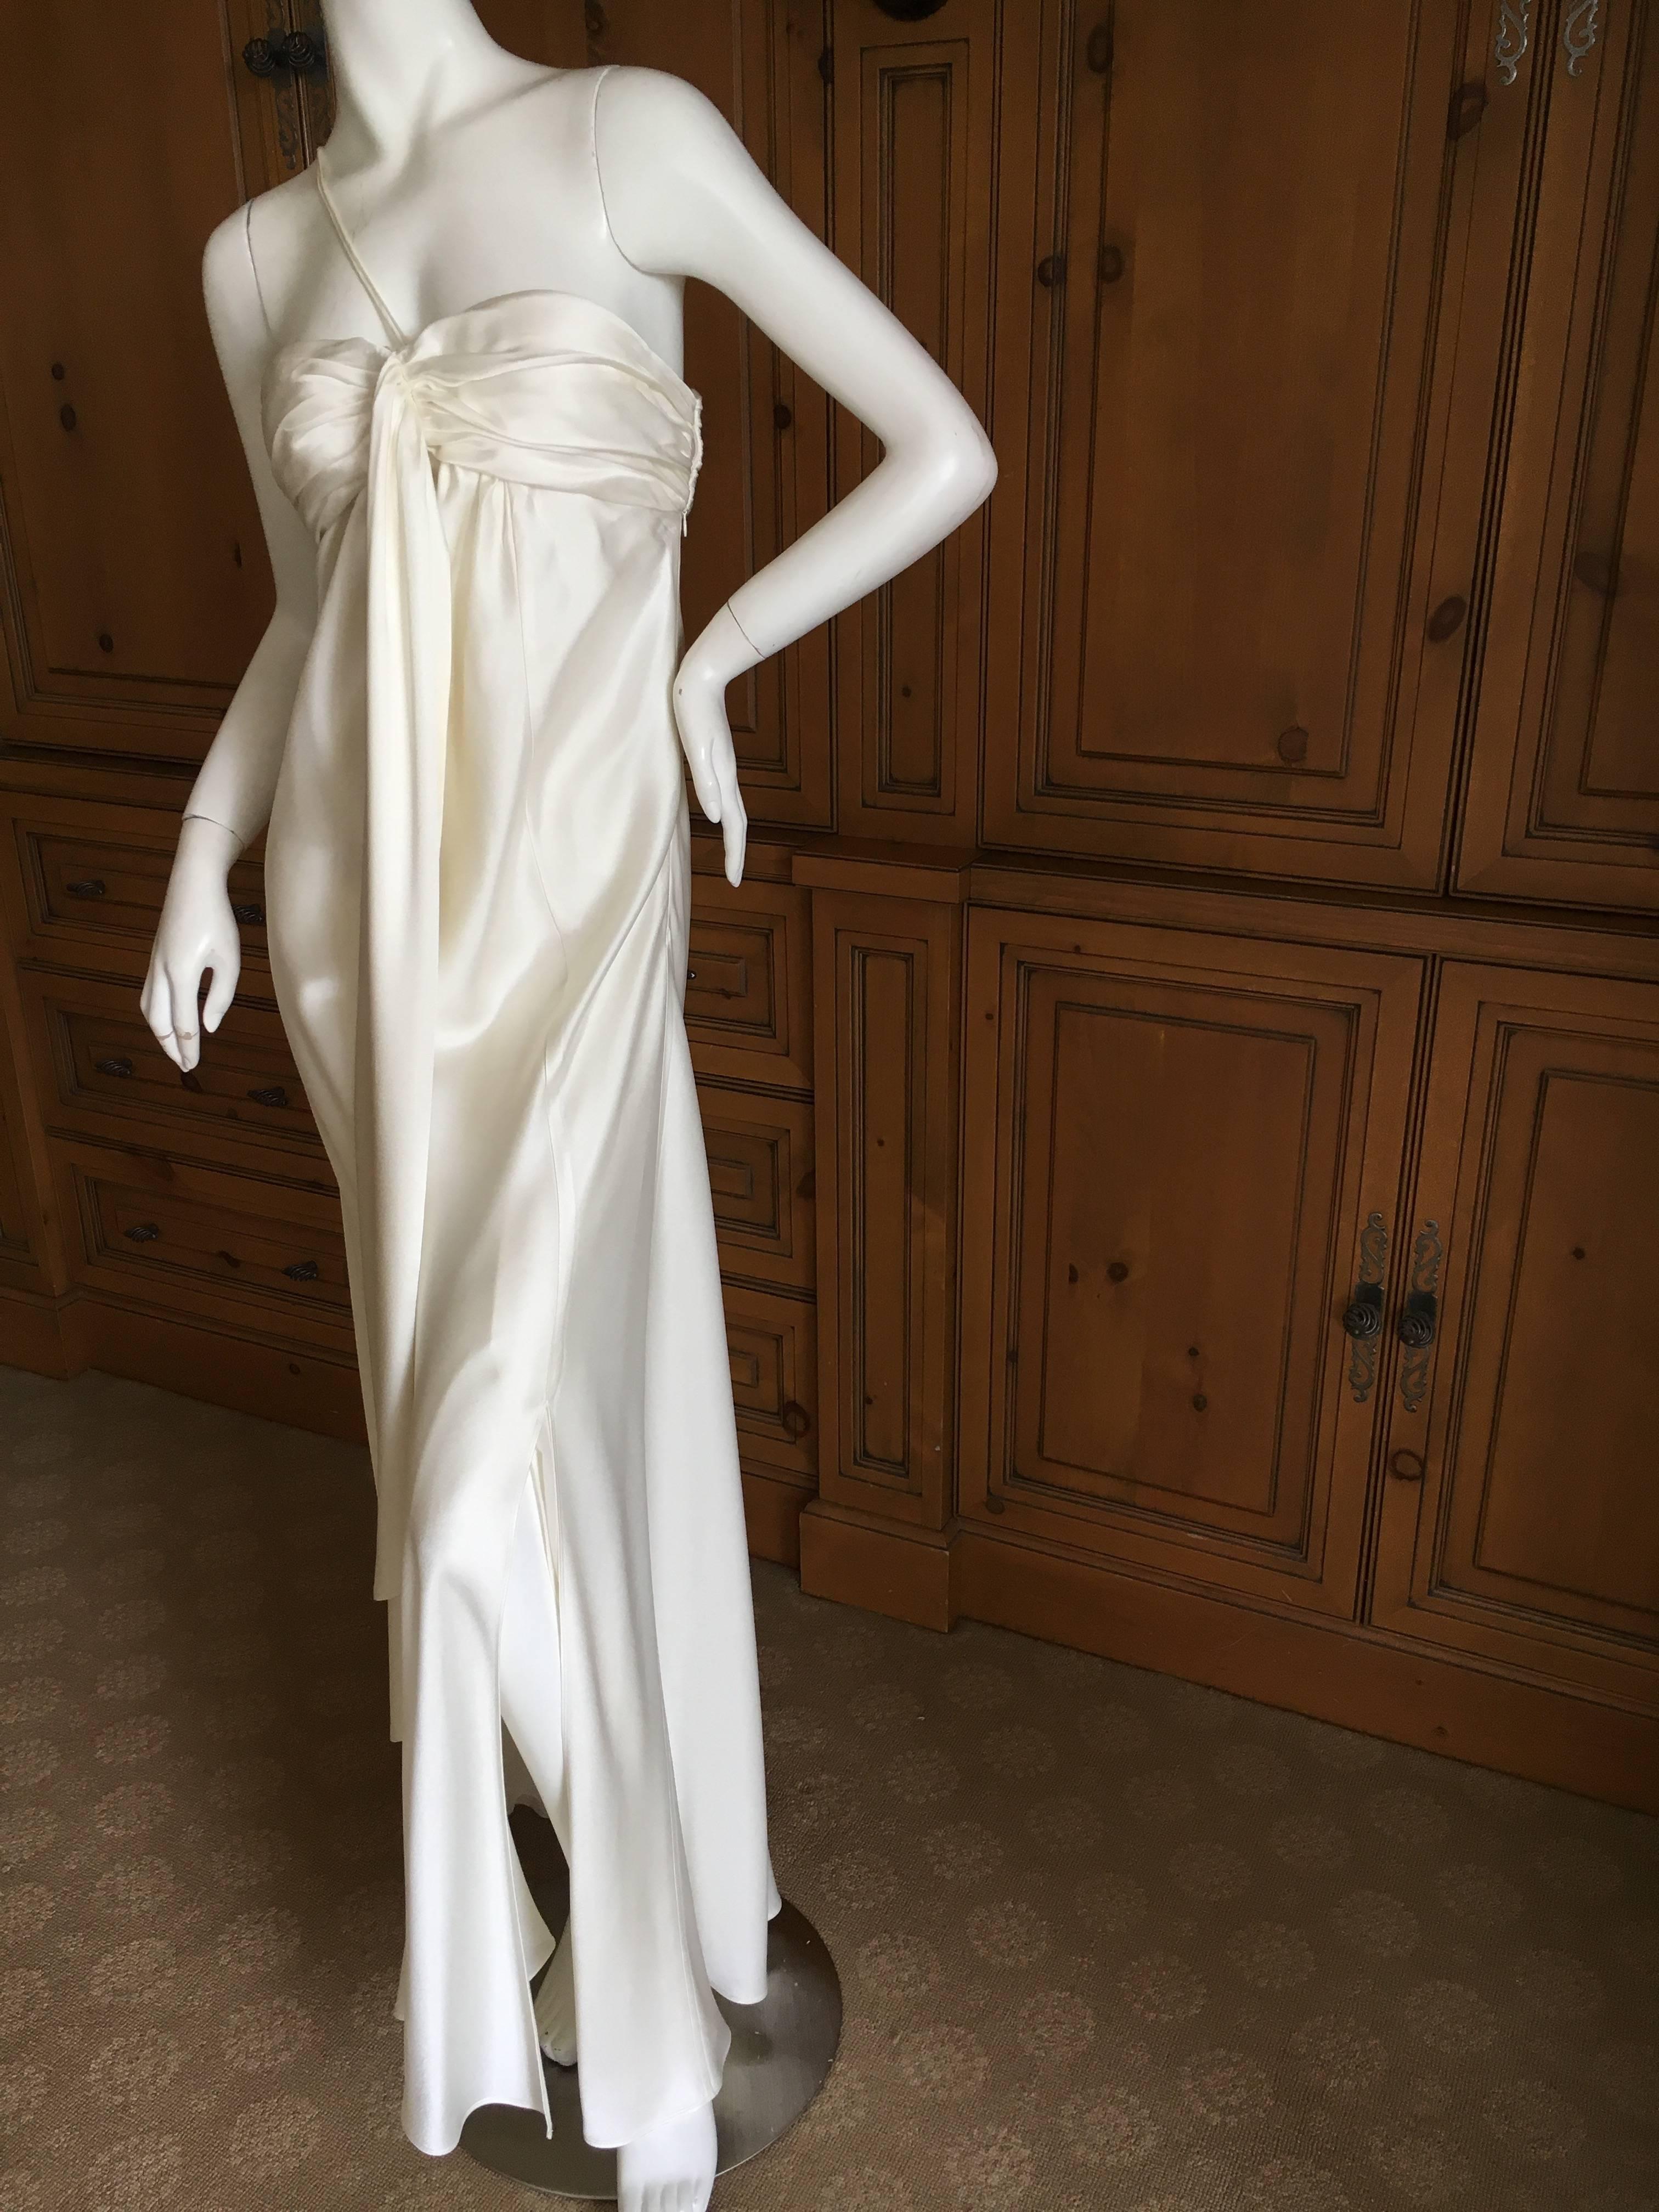 John Galliano 1990's Ivory Draped Goddess Gown.
Size 44"
Bust 36"
Waist 30'
Hips 44"
Length 62"
Excellent condition